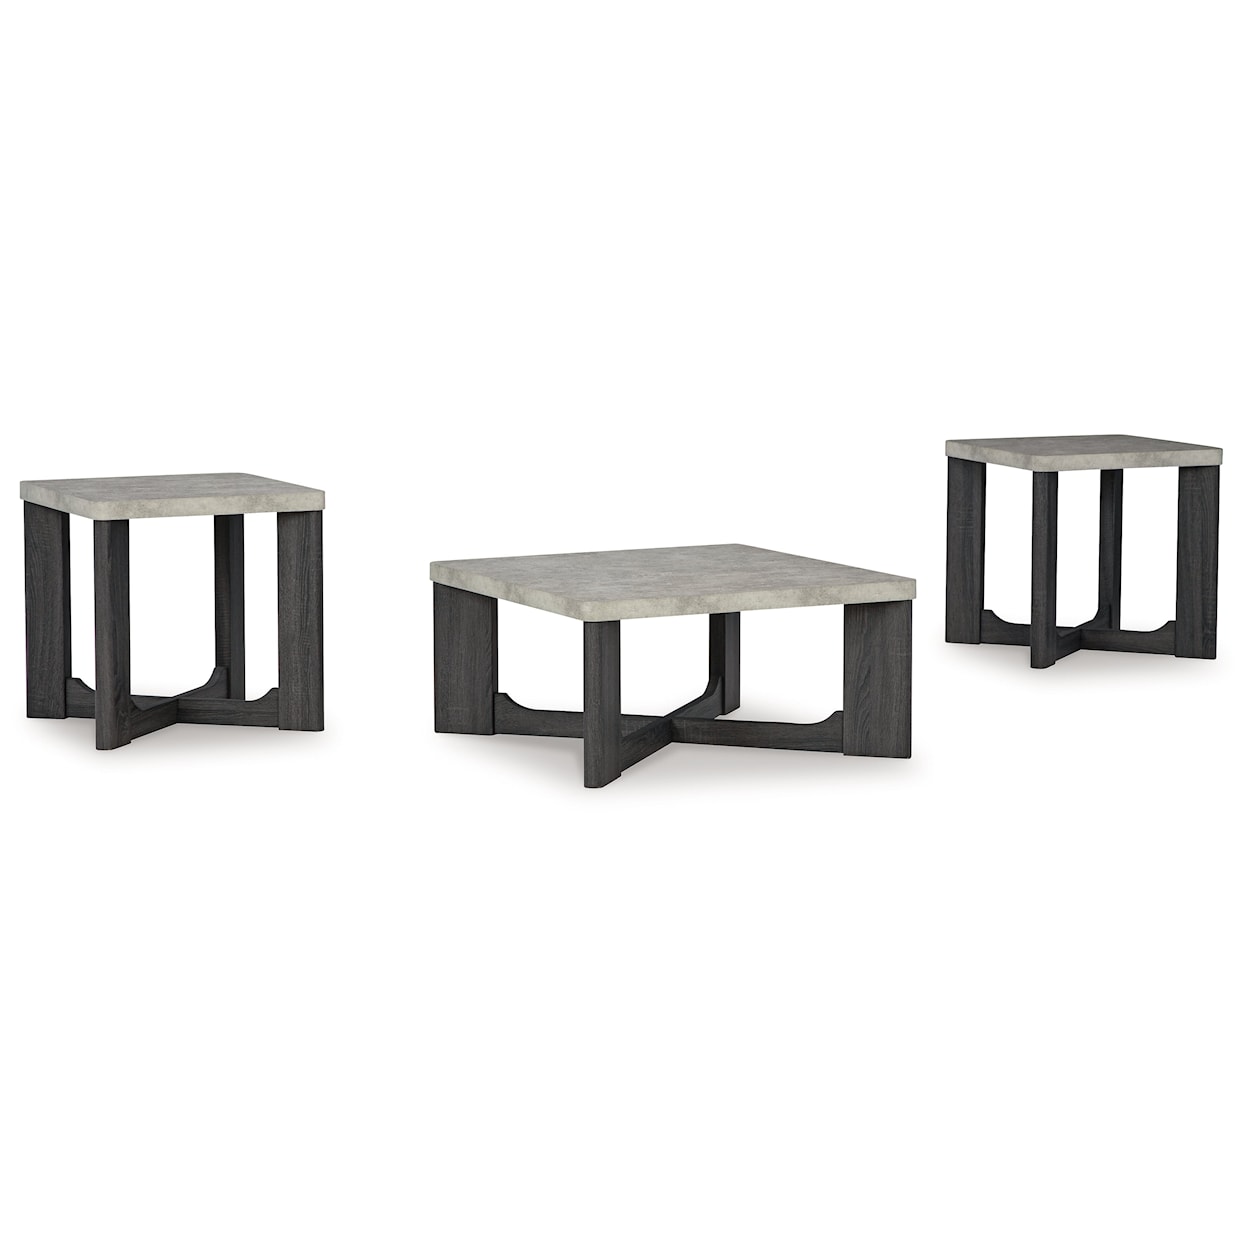 Signature Design by Ashley Sharstorm Occasional Table Set